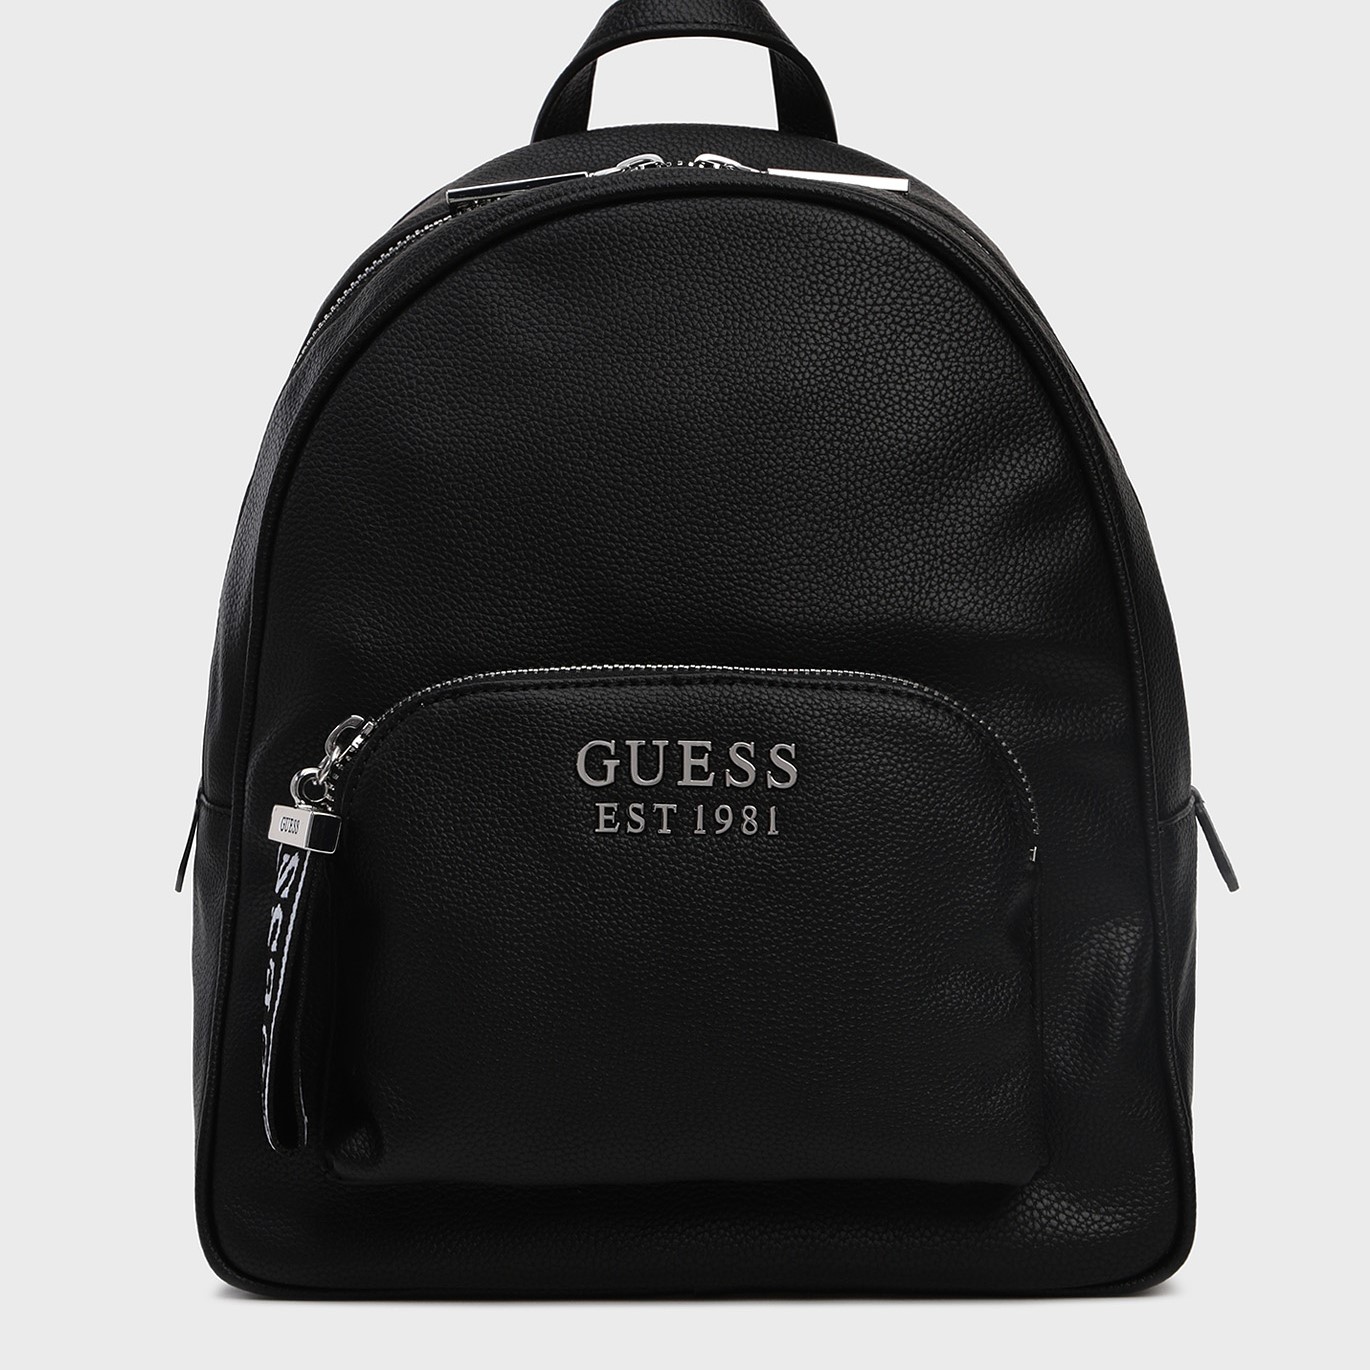 BALO GUESS BACKPACK 1